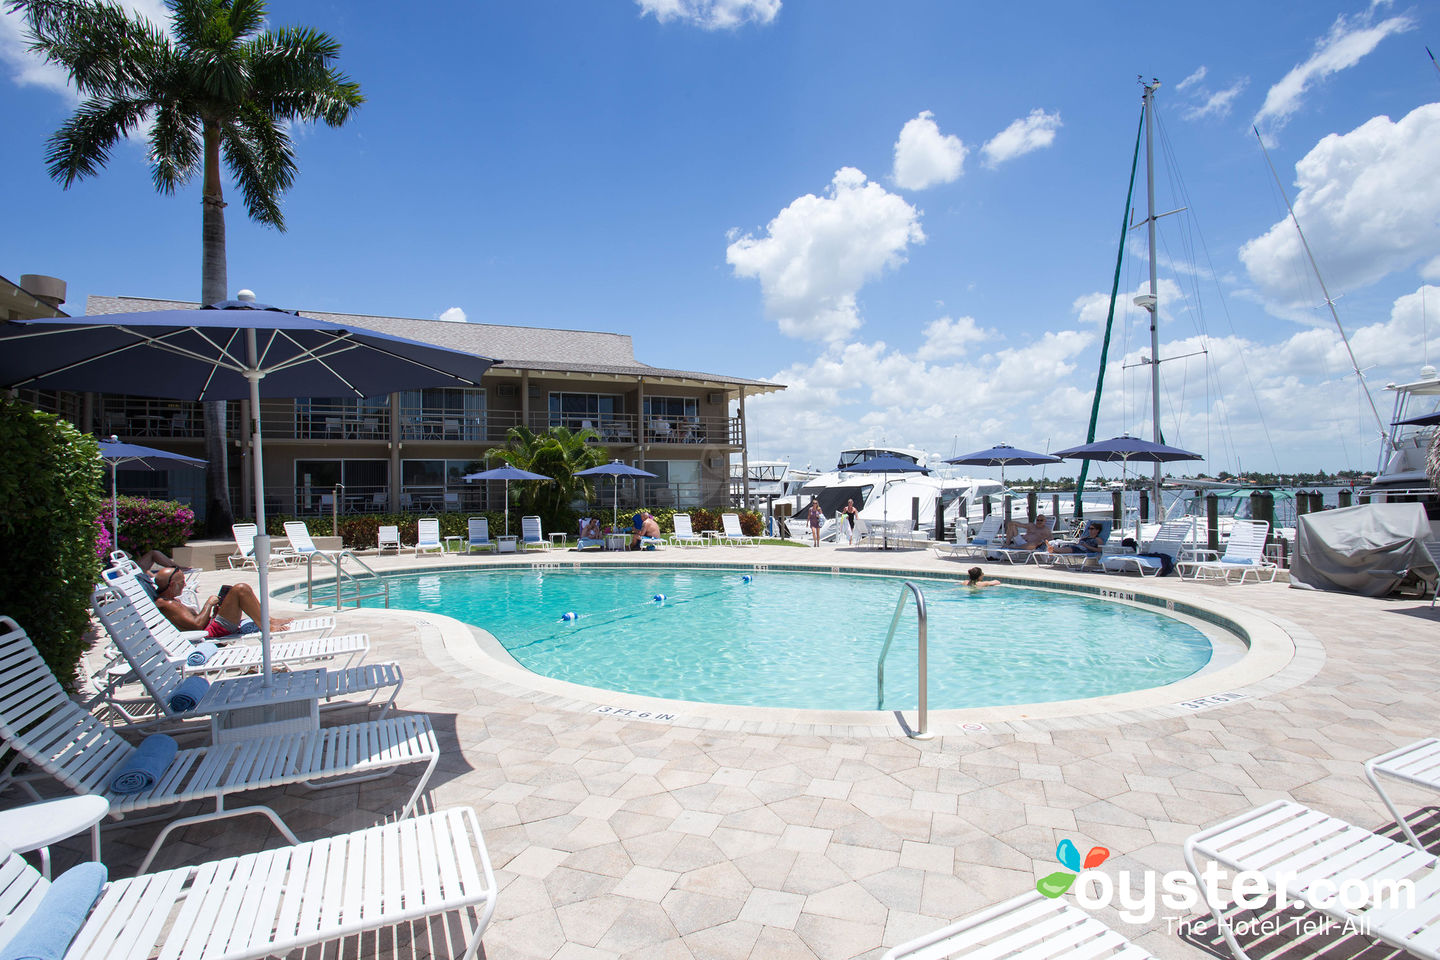 Cove Inn on Naples Bay Review: What To REALLY Expect If You Stay